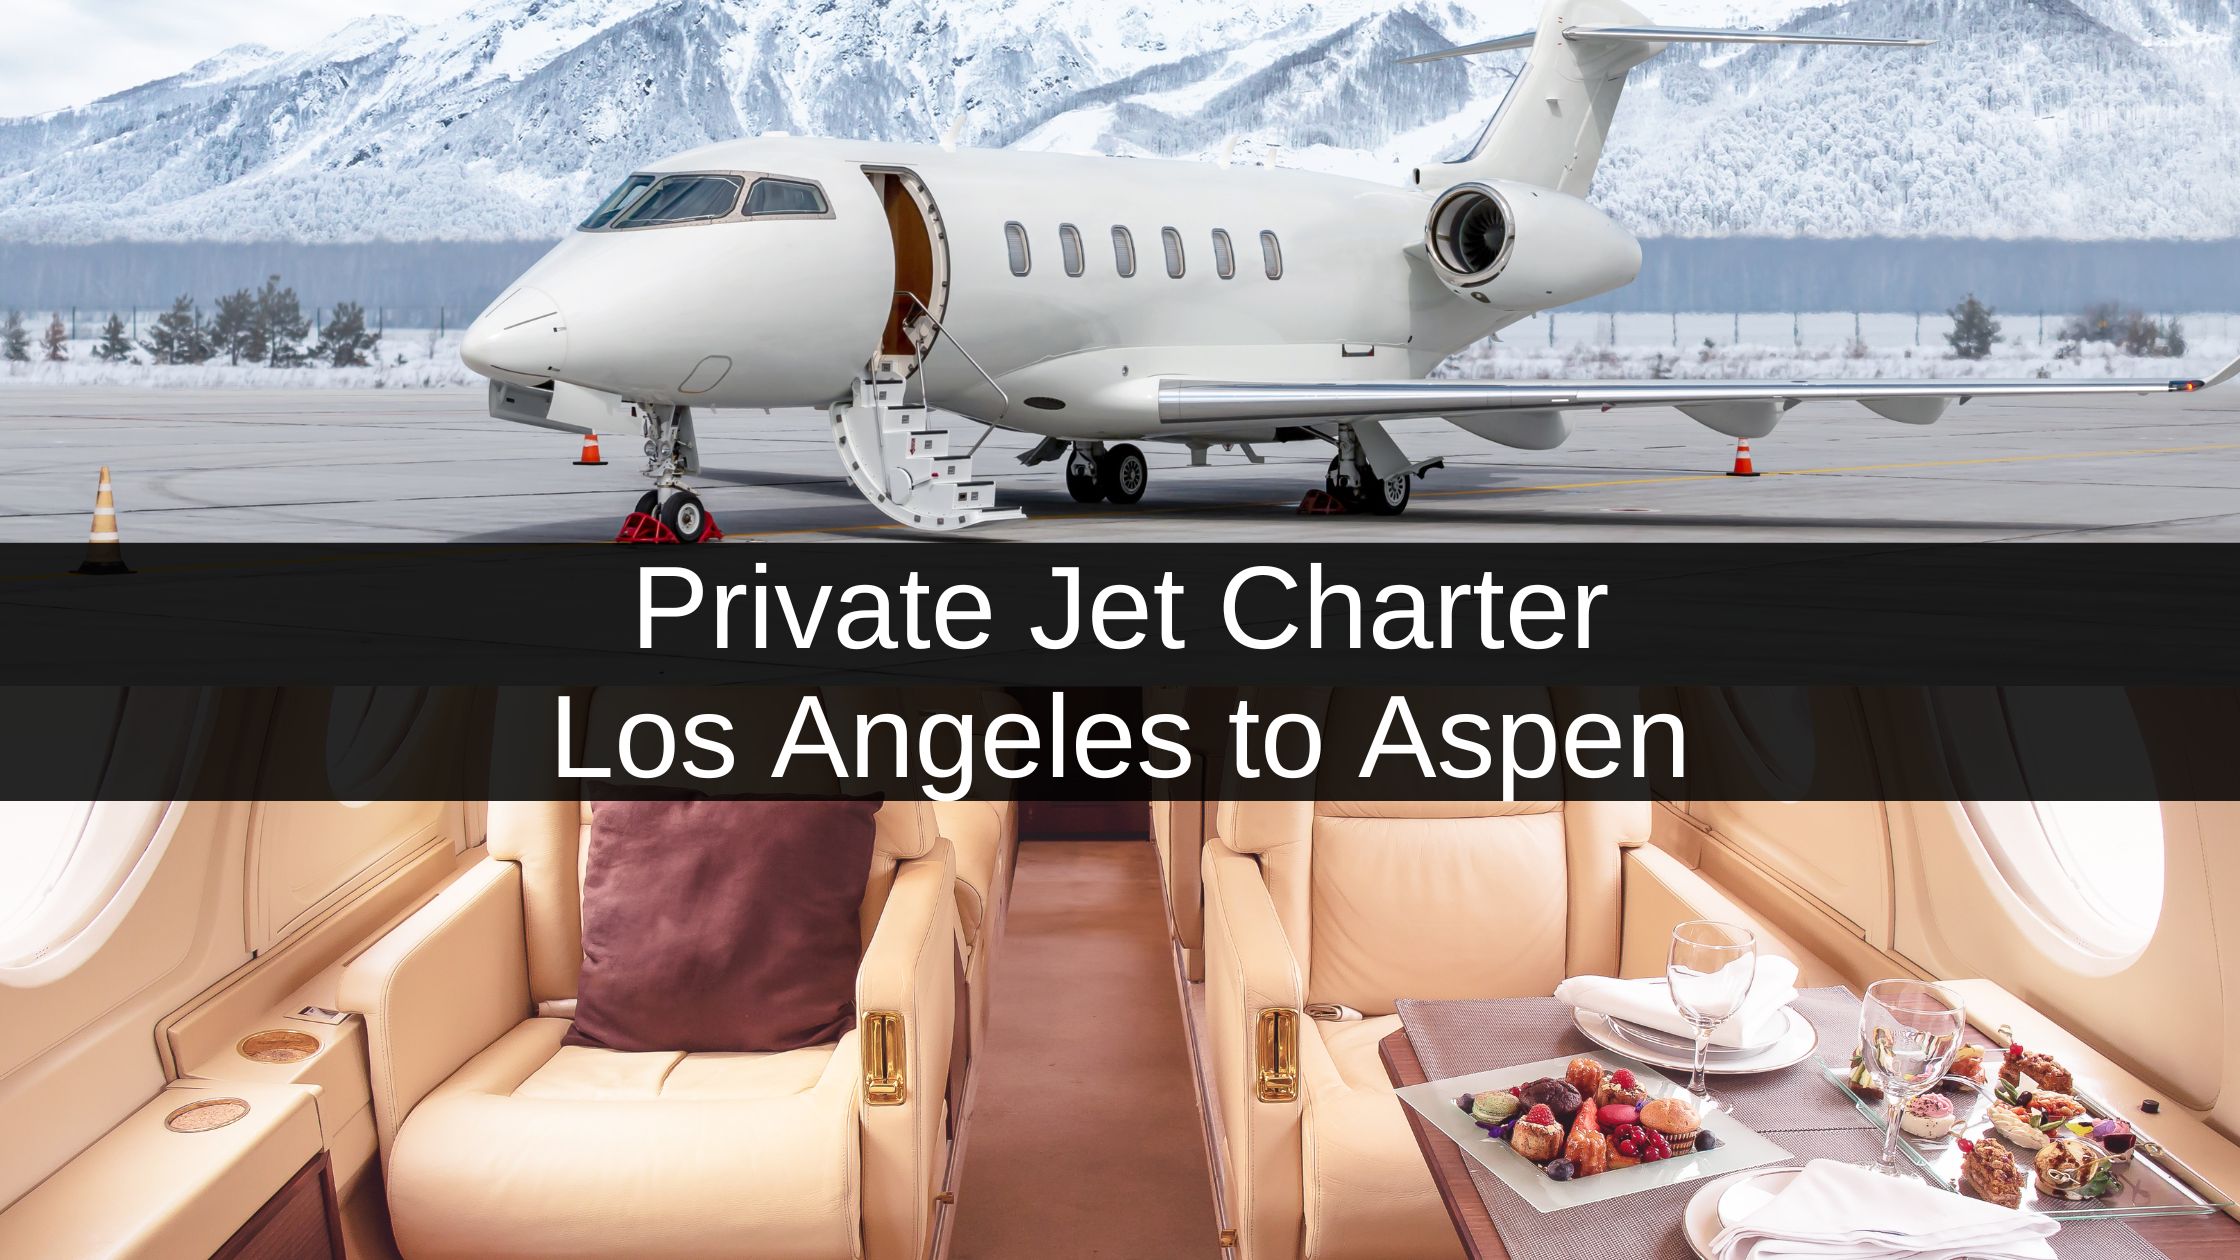 Private Jet Charter Los Angeles to Aspen